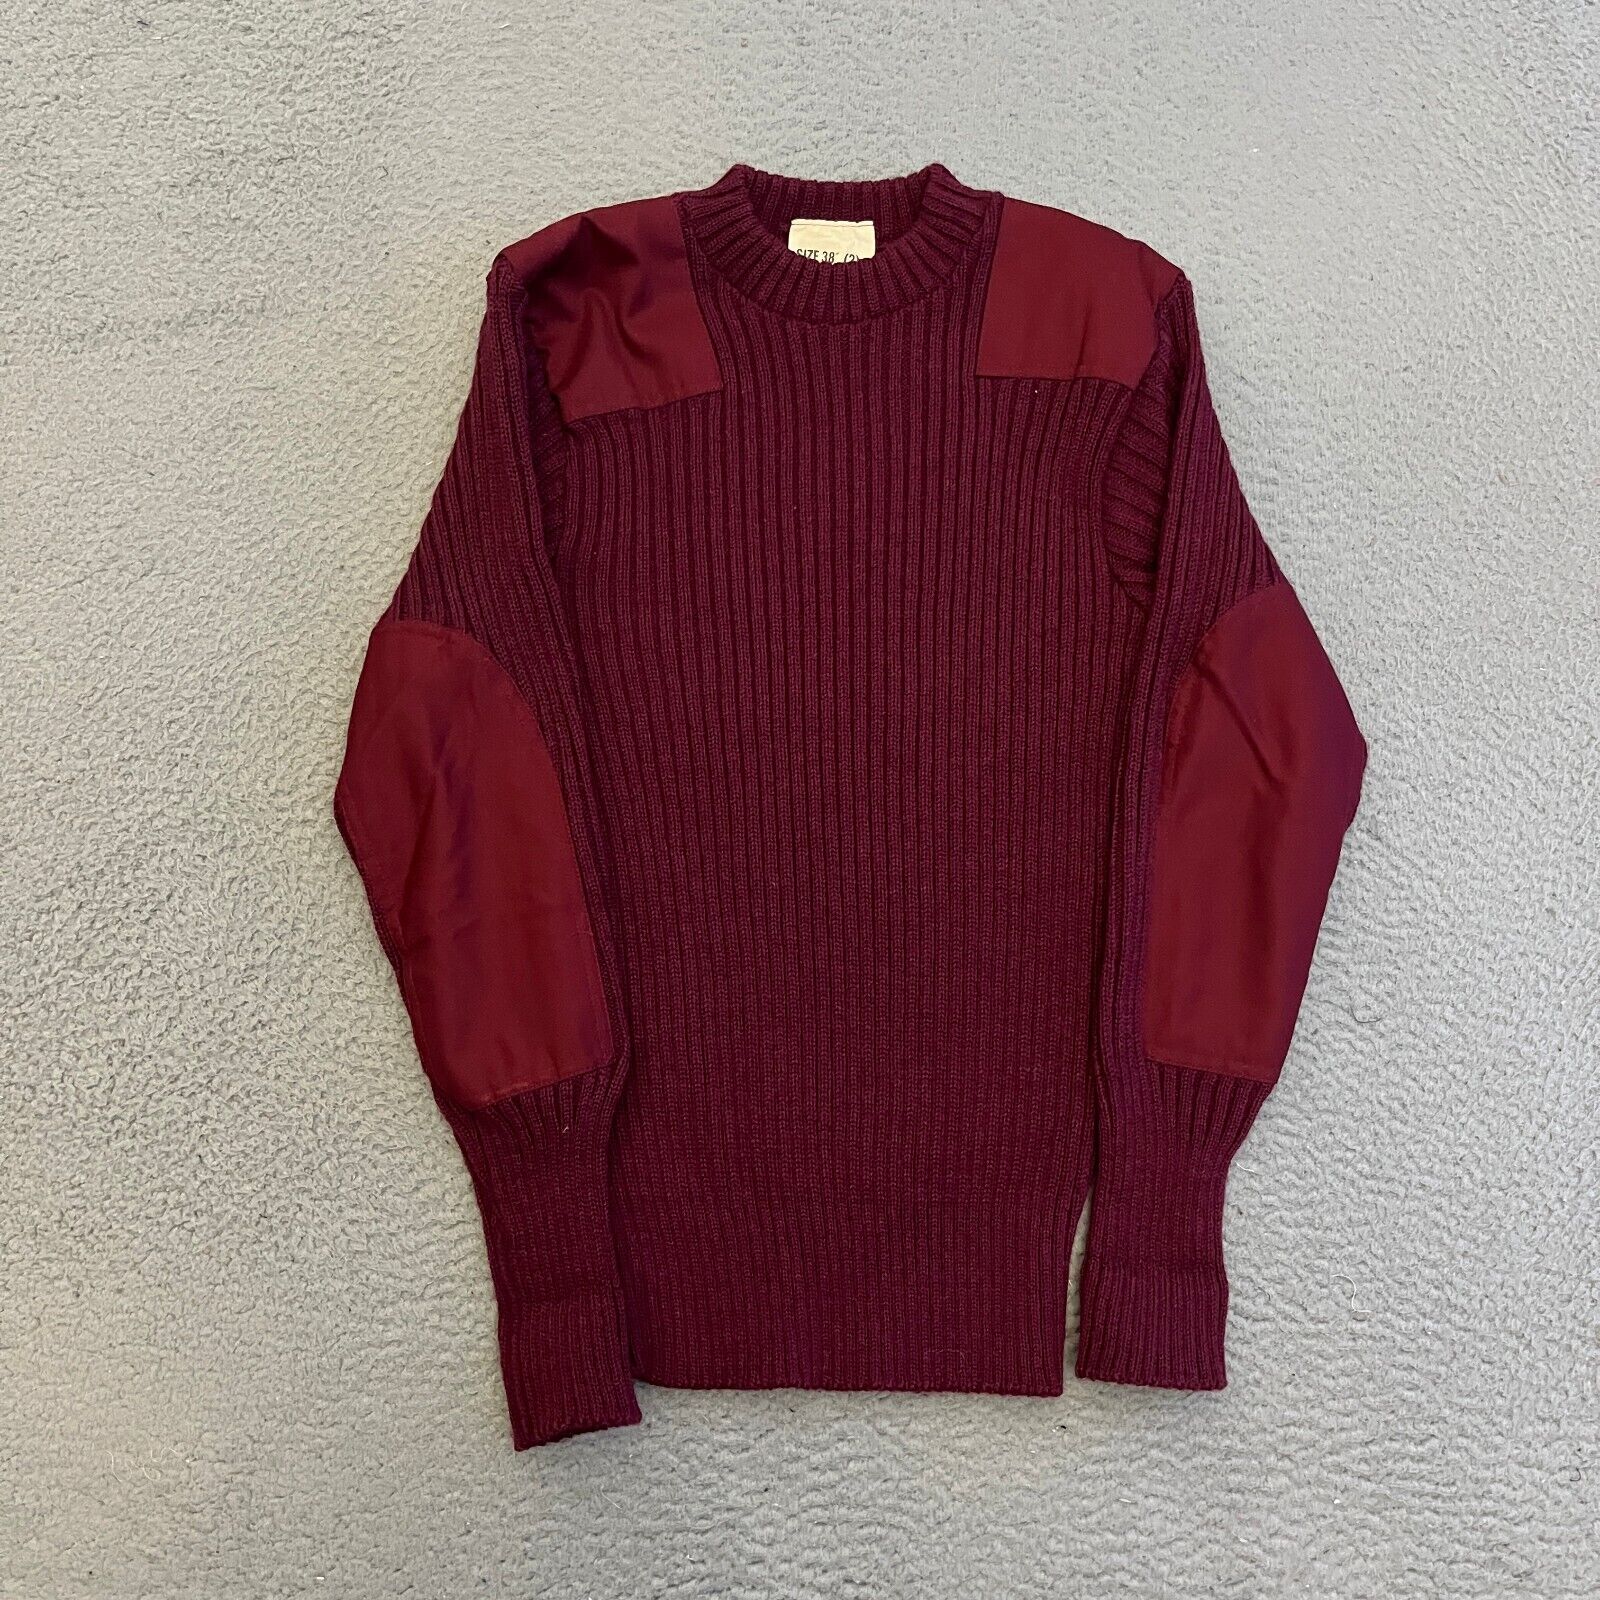 UK England Military Jersey Sweater Size 38 (2) Red Wool